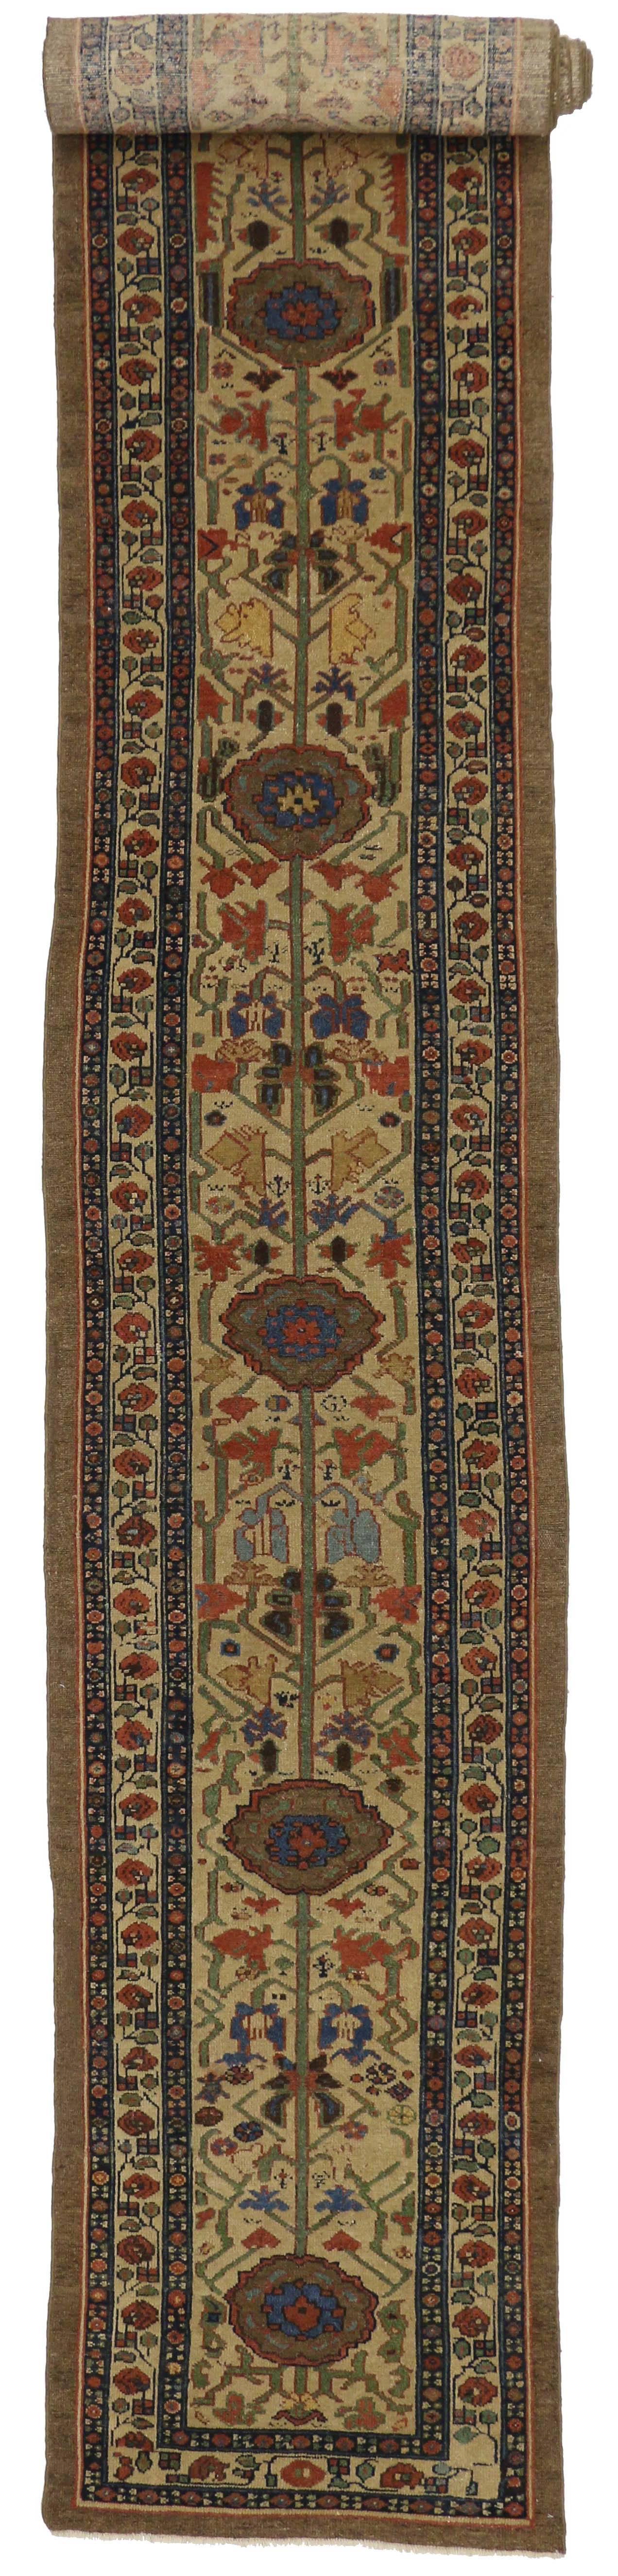 Antique Persian Malayer Extra-Long Hallway Runner with Arts & Crafts Style  For Sale 3